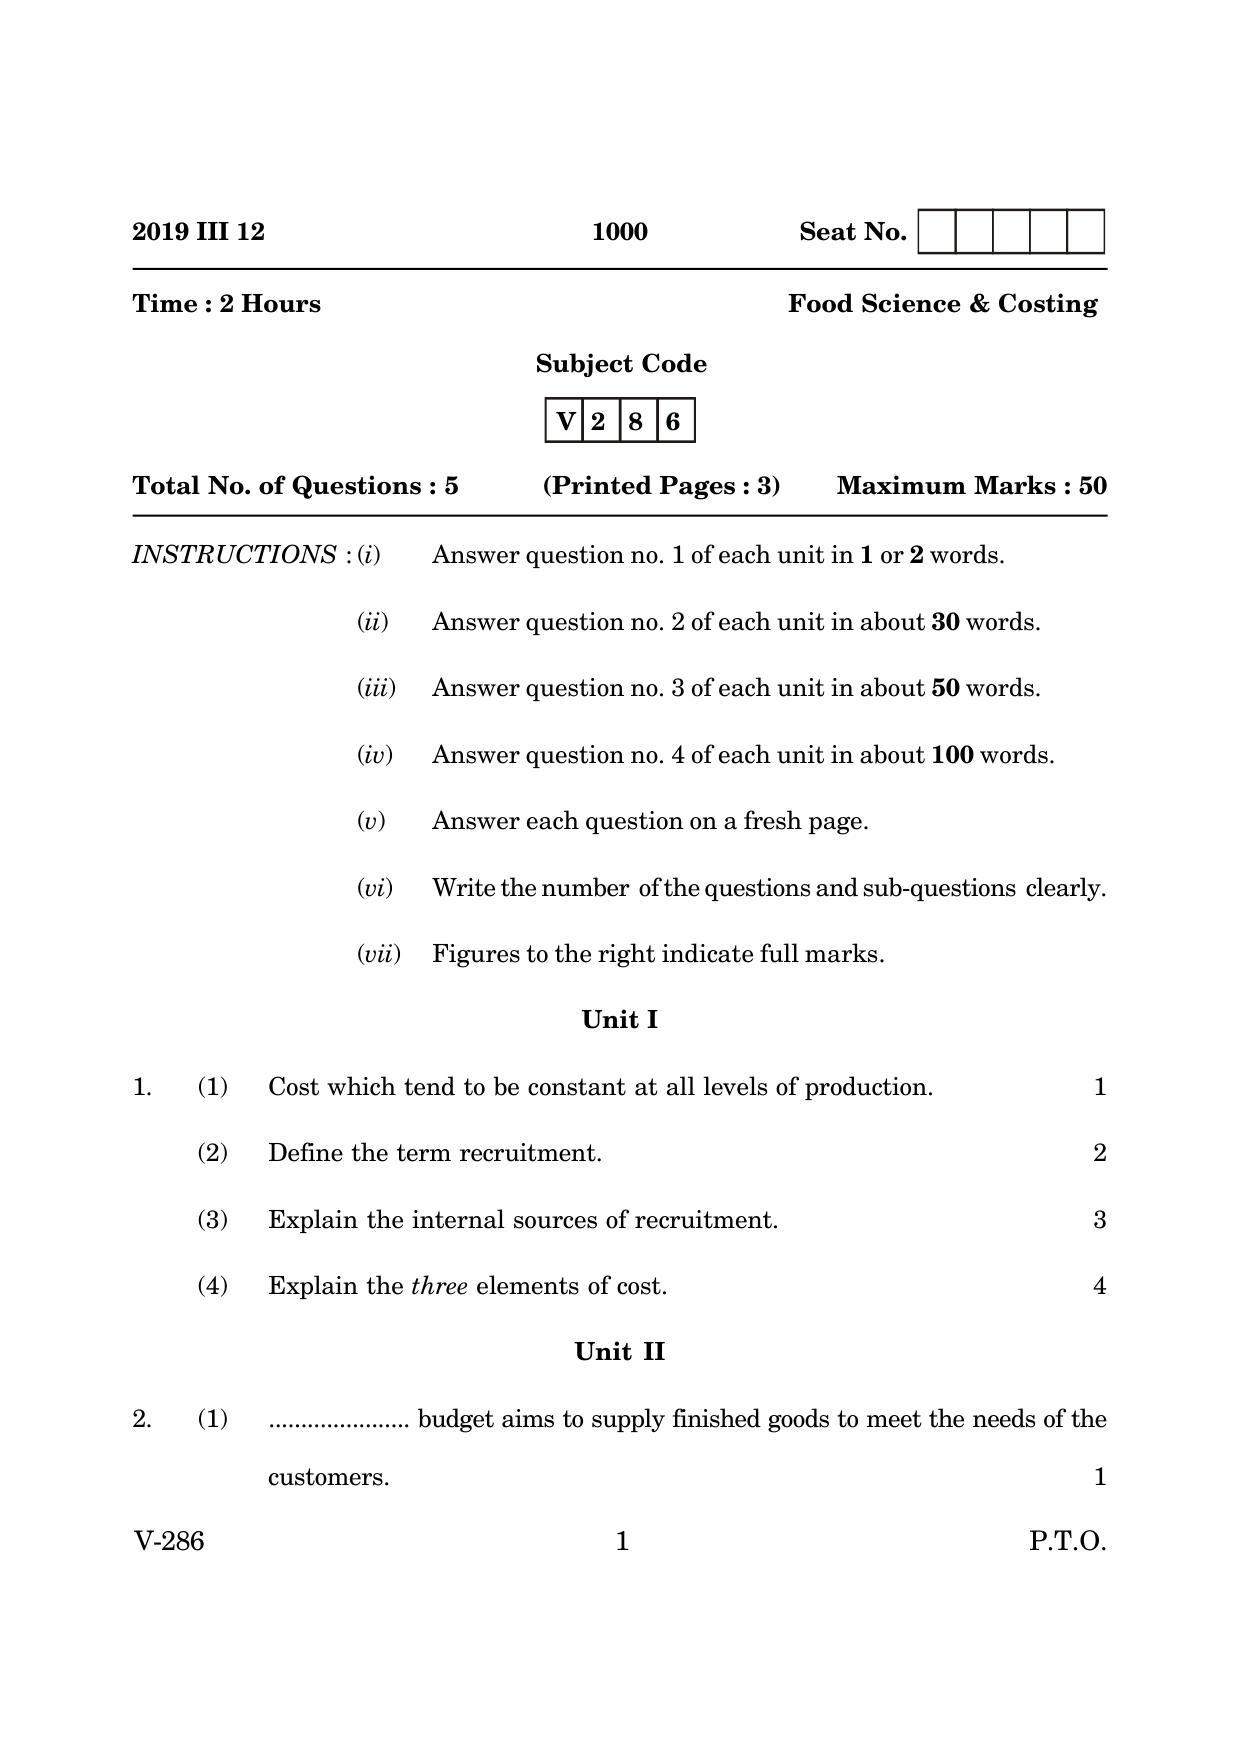 Goa Board Class 12 Food Science & Costing  2019 (March 2019) Question Paper - Page 1